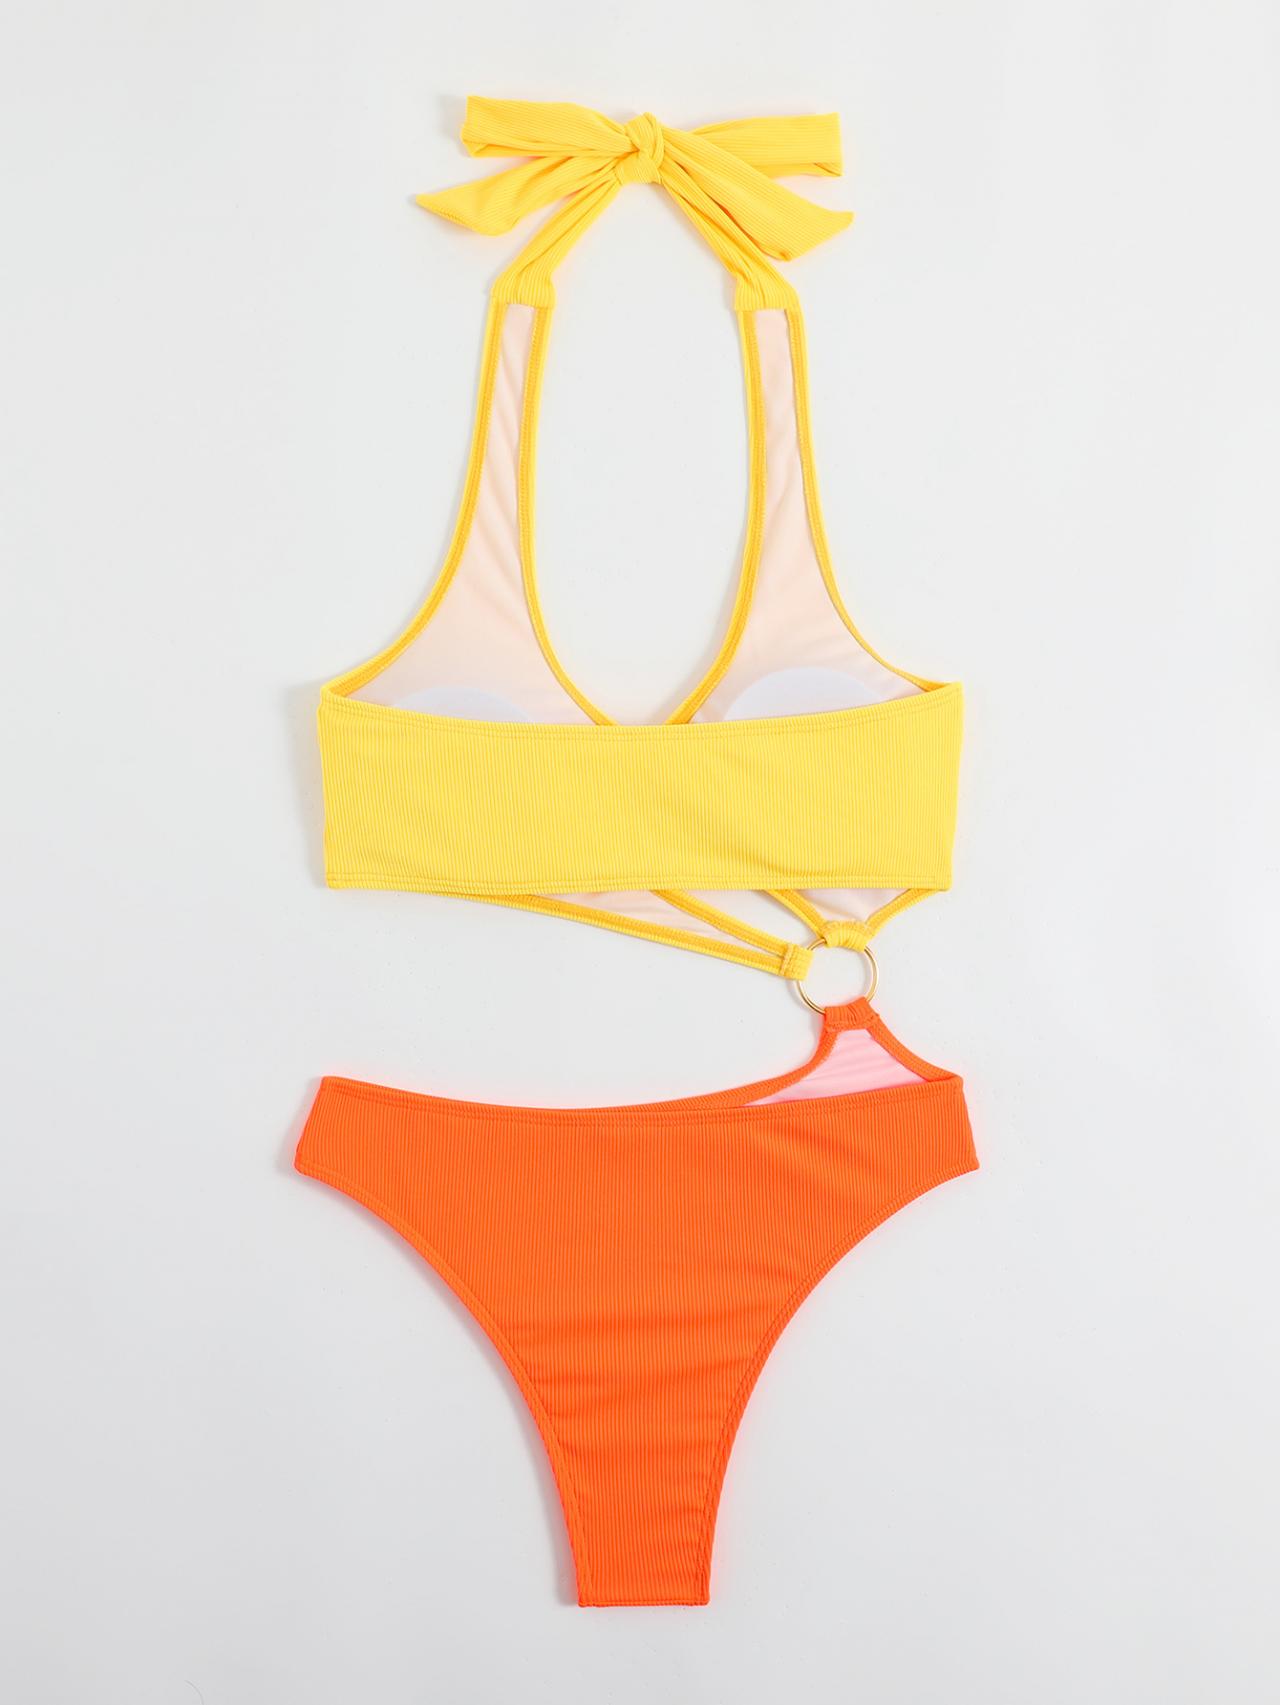 Women's Swimsuit Yellow Orange Color Matching One Piece Swimsuit